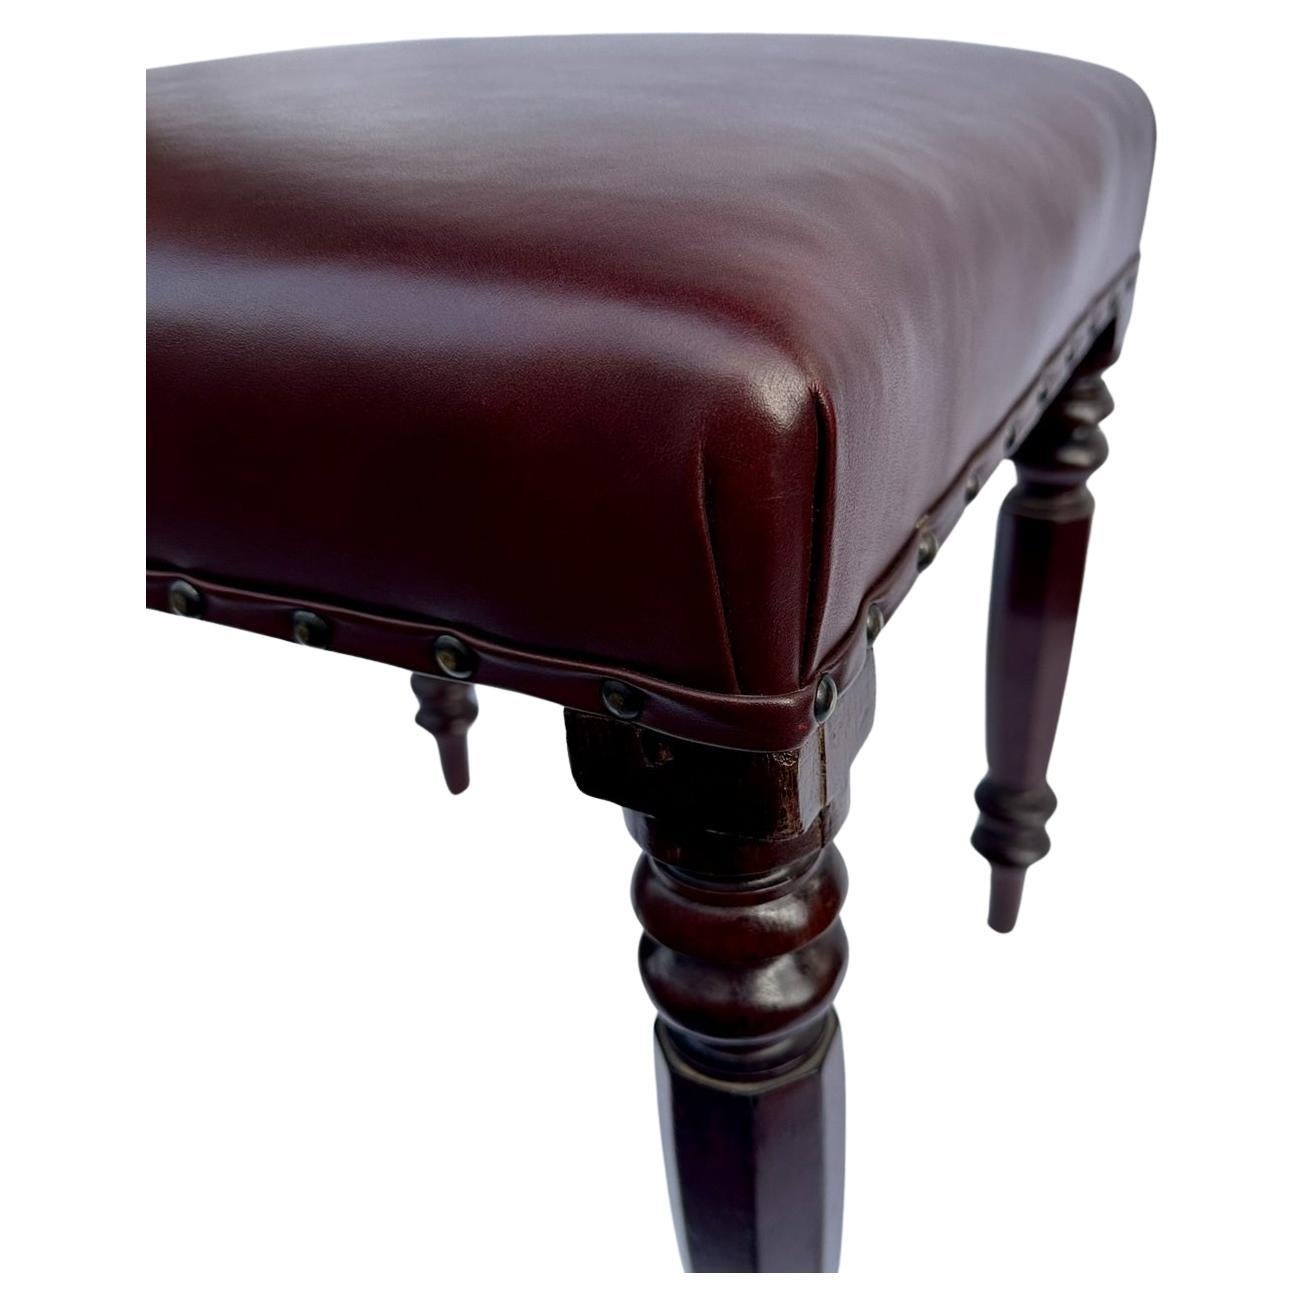 Pair Antique English Victorian Carved Mahogany Leather Upholstered Stools 19 Ct. In Good Condition For Sale In Dublin, Ireland